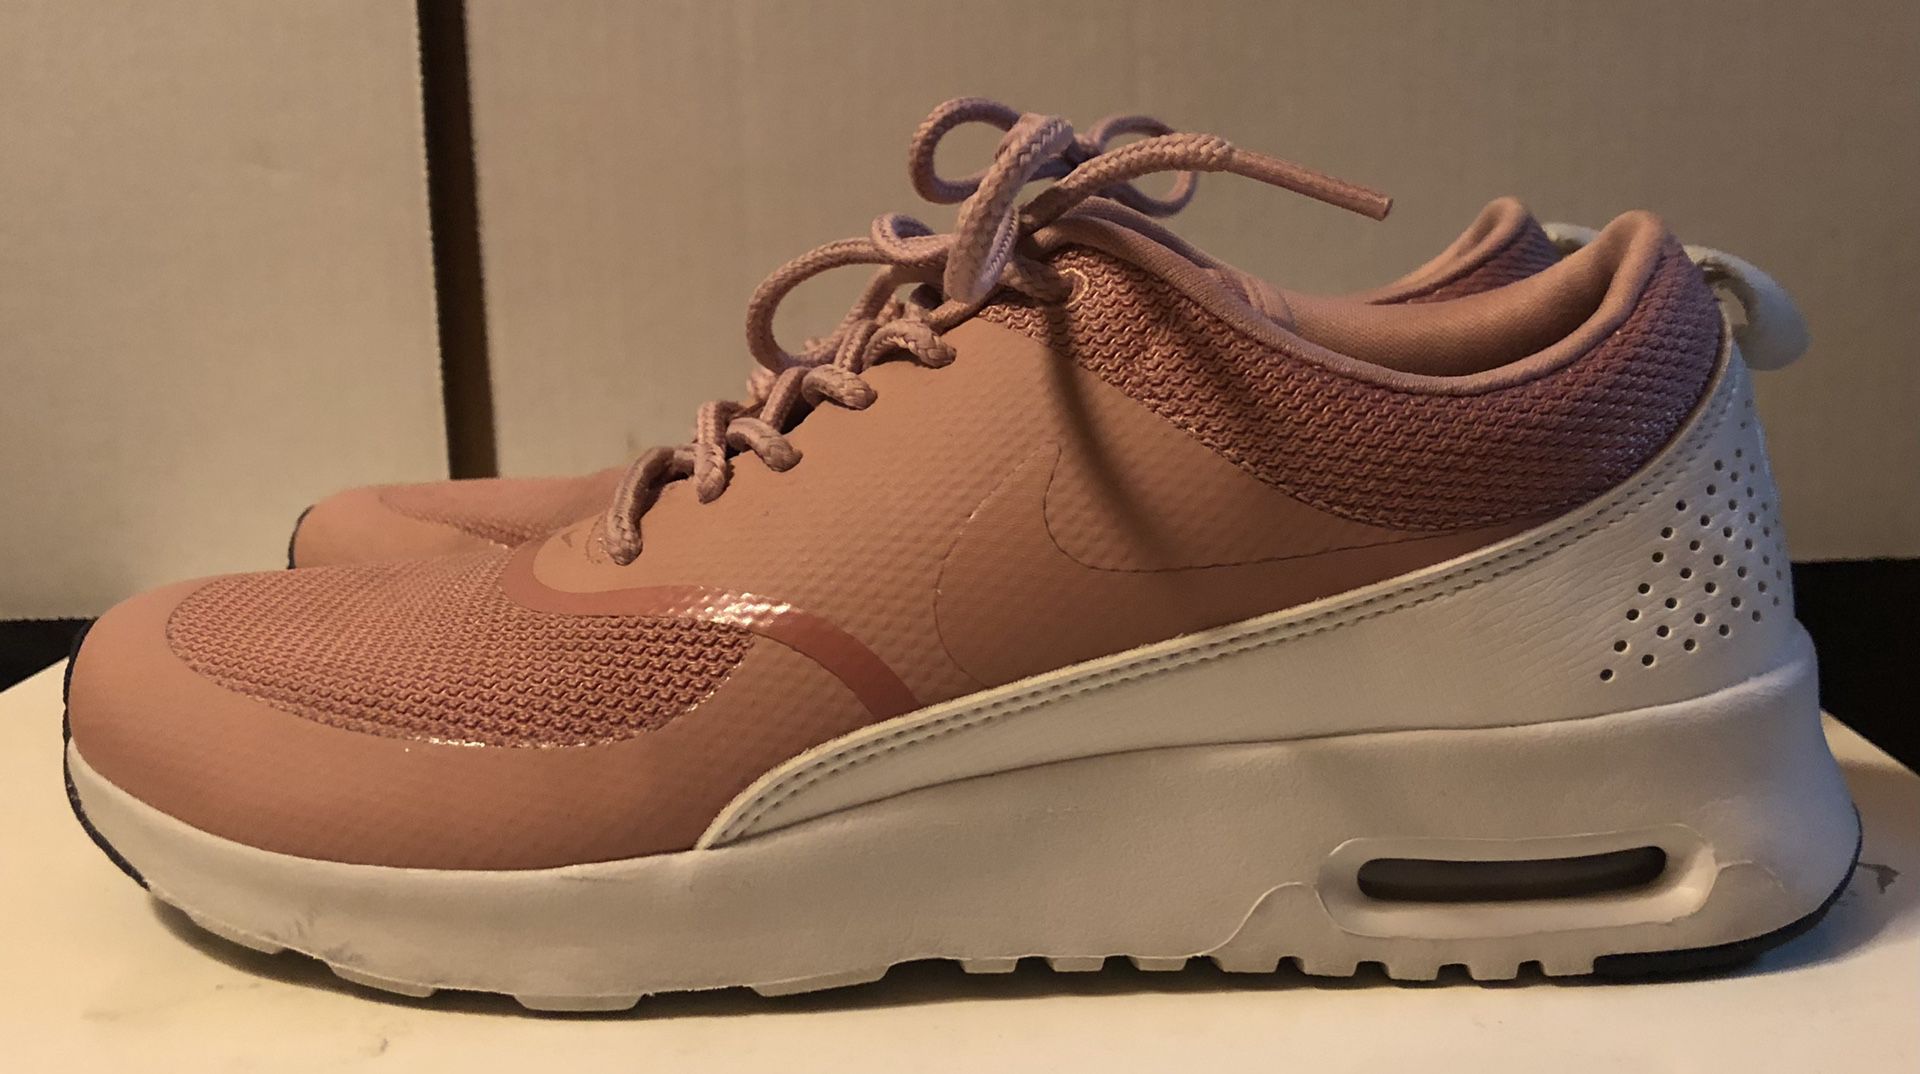 Ladder Convergeren kas Nike Air Max Thea Rust Pink Size 6 for Sale in Fremont, CA - OfferUp